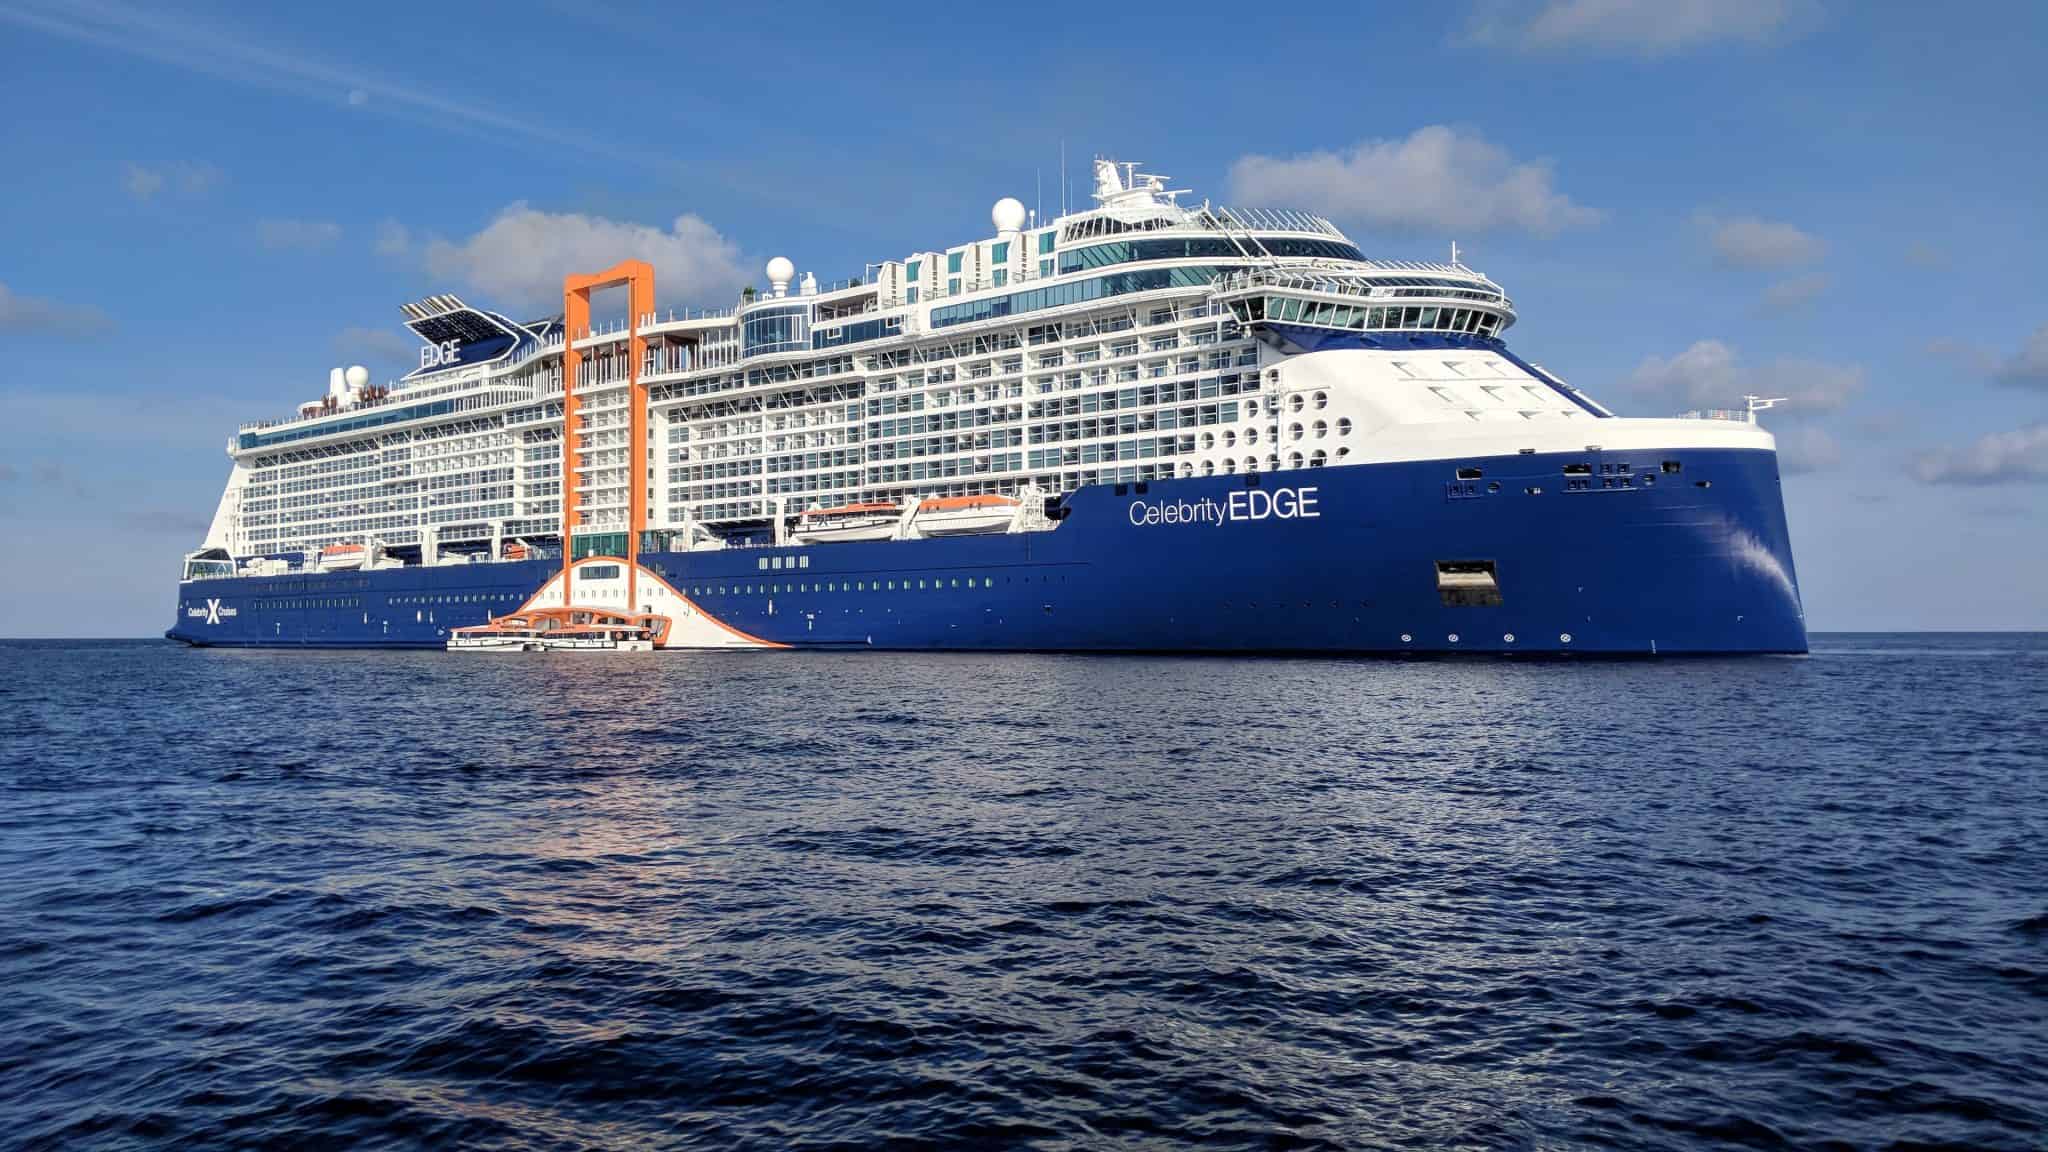 Celebrity Cruises' Celebrity Edge First Major Cruise Ship Approved To